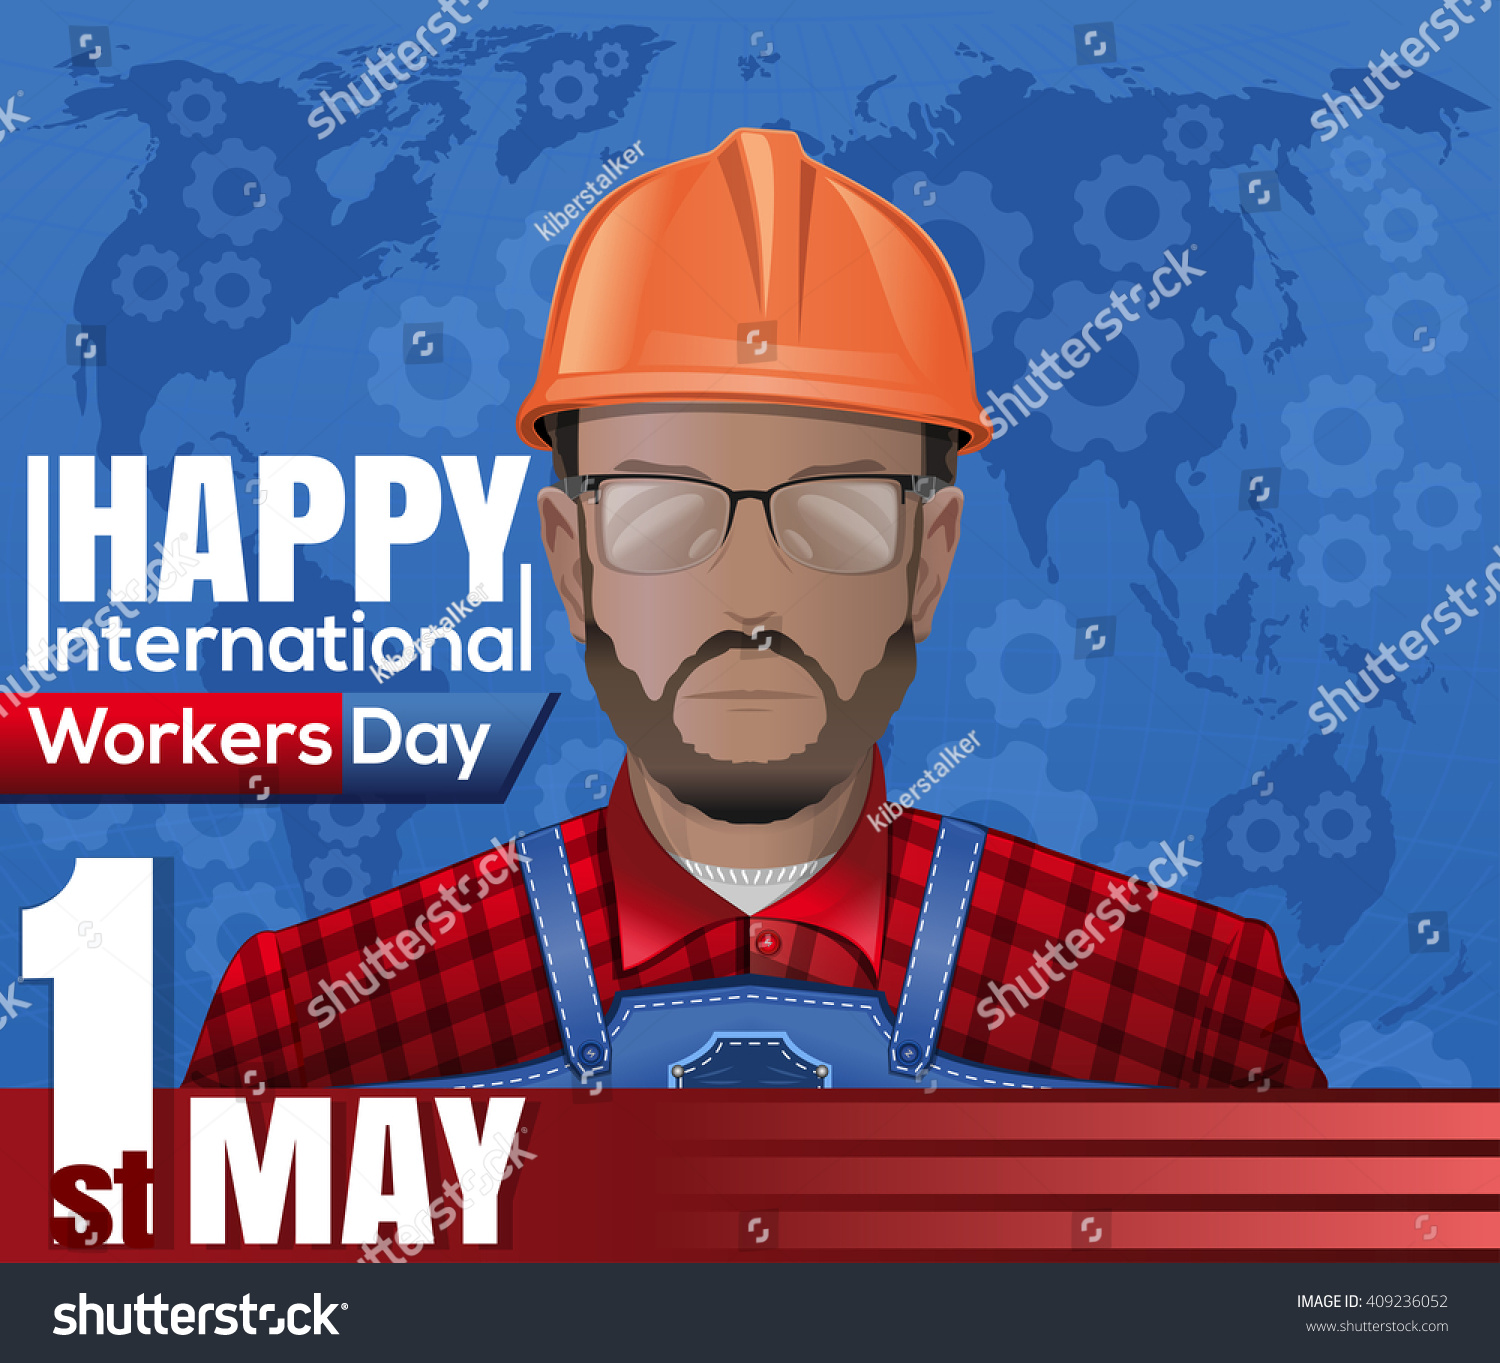 May working days. 1 May International workers' Day. Happy International workers Day 1 May. Happy International workers Day. Happy worker's Day.